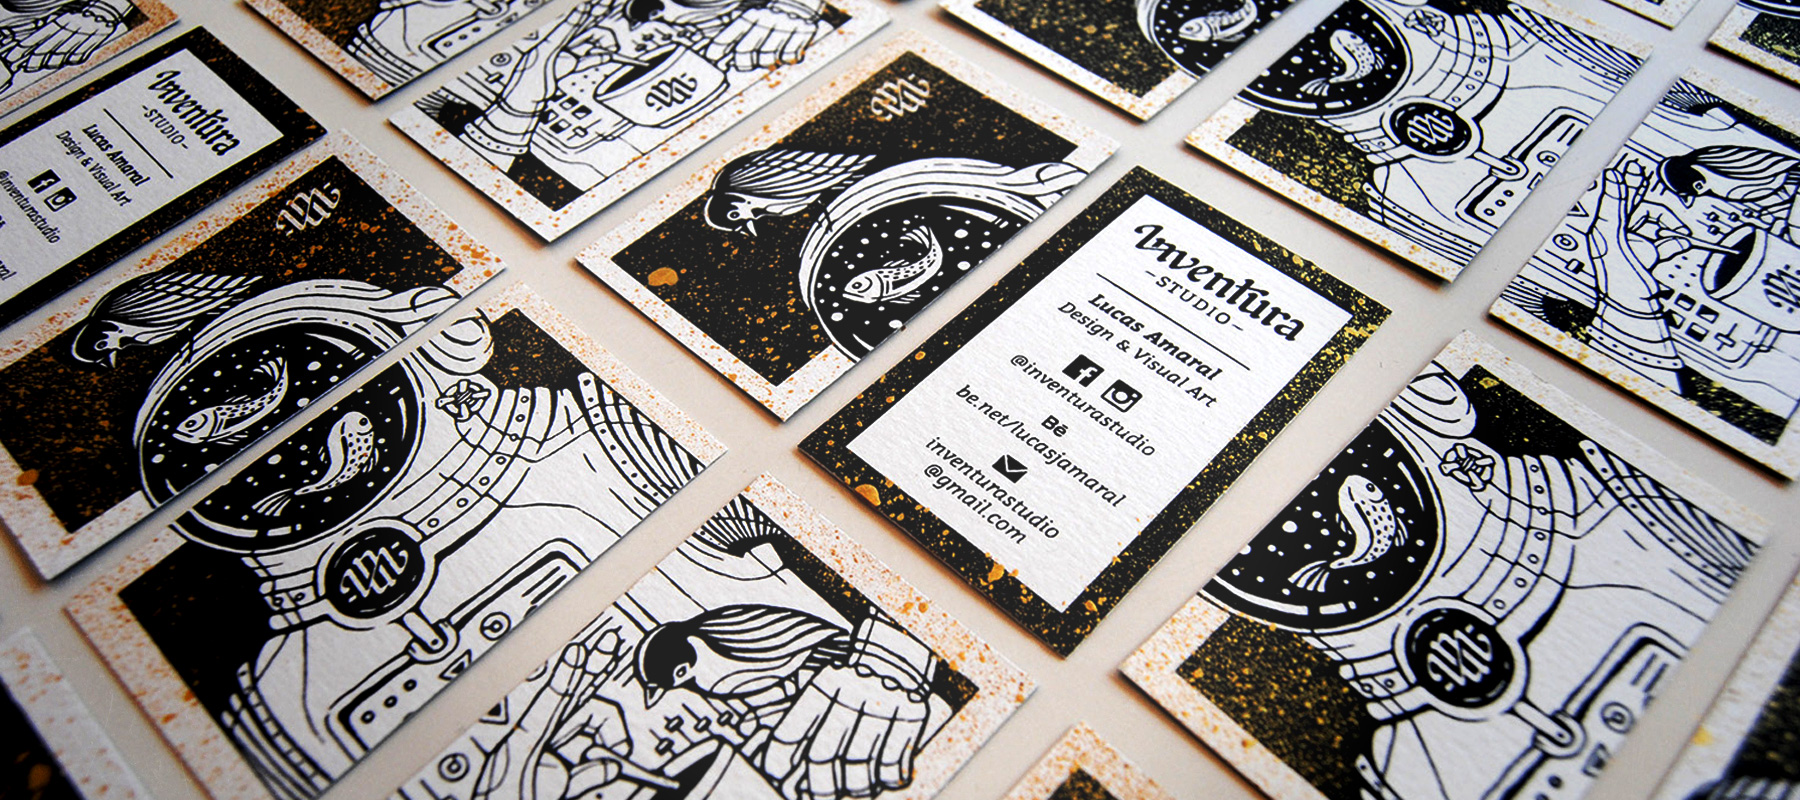 30 Business Card Designs for Creative Inspiration | CreativesFeed